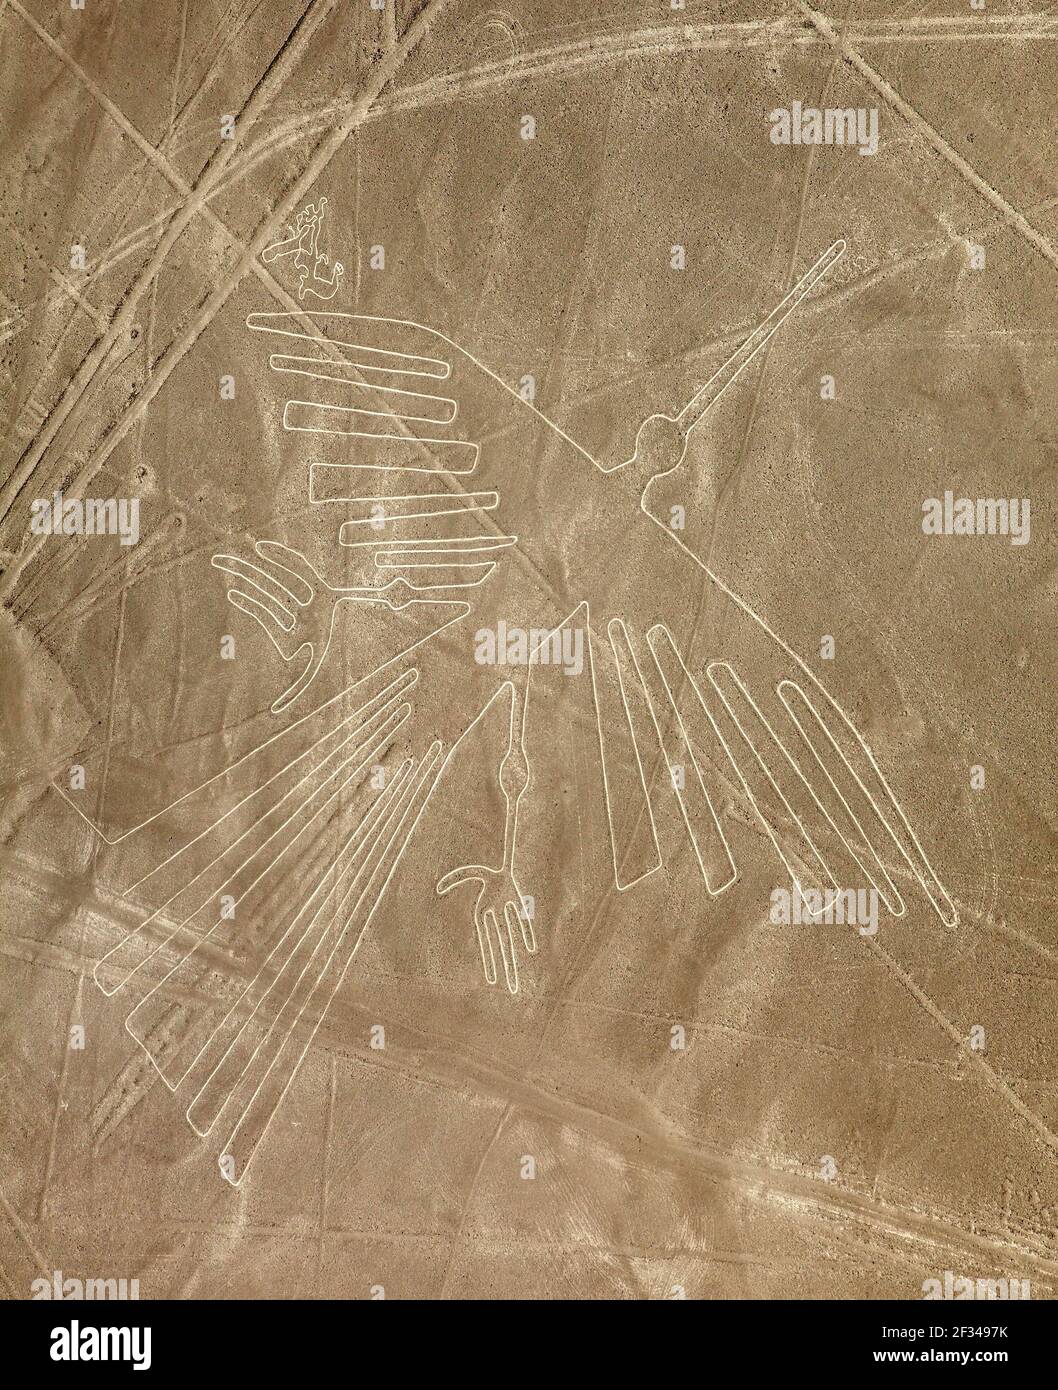 Condor geoglyph, Nazca or Nazca mysterious lines and geoglyphs aerial view sepia colored, landmark in Peru Stock Photo